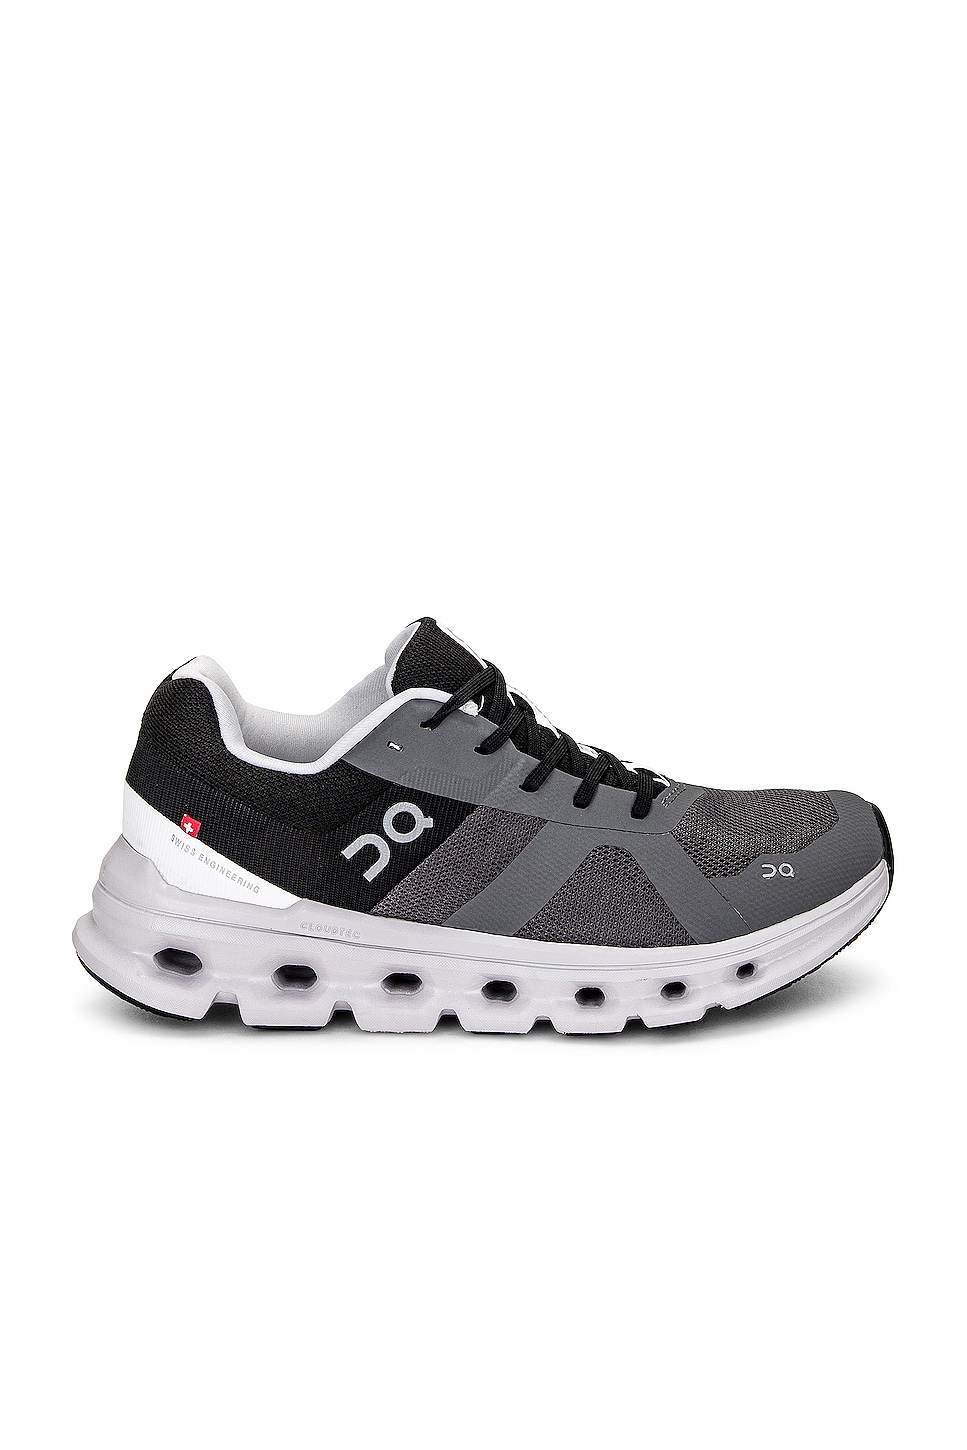 Image 1 of On Cloudrunner Sneaker in Eclipse & Black